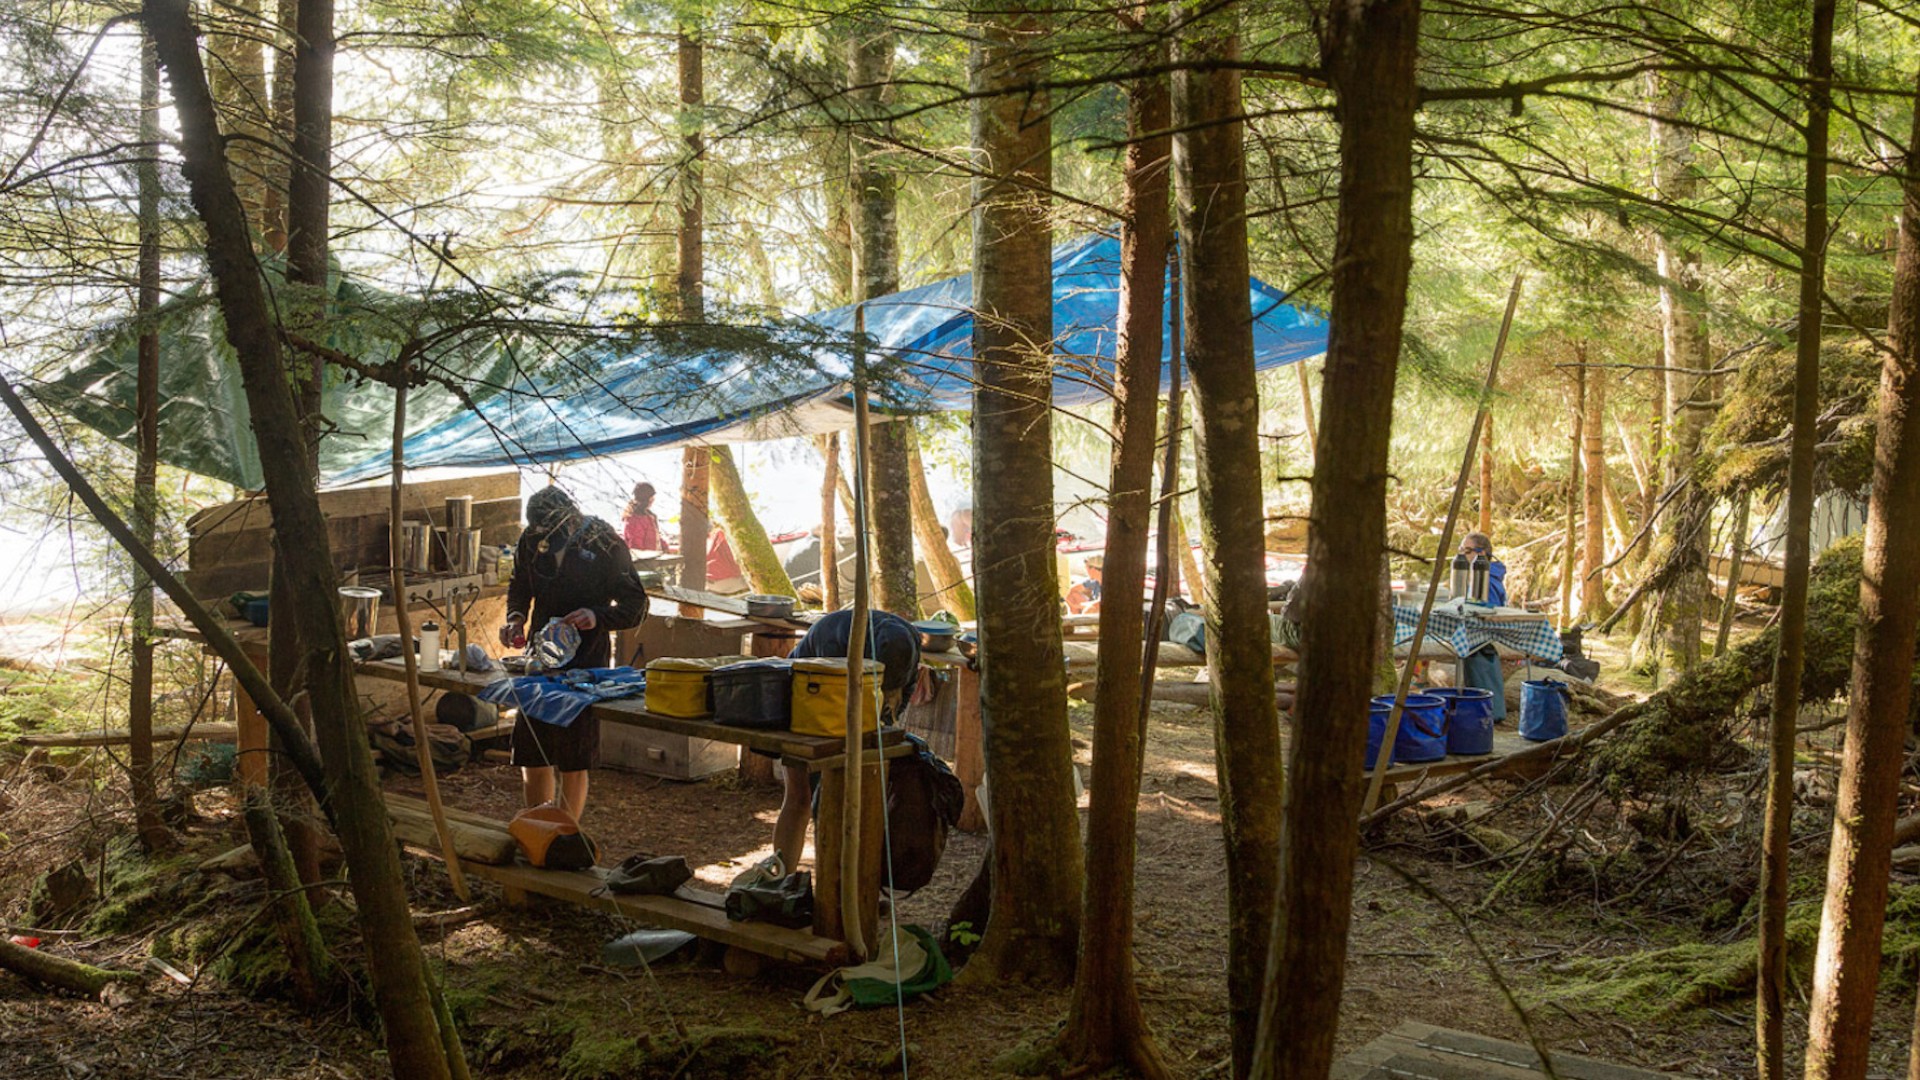 Camping kitchen set up in a dense forest with blue tarps hung in the trees 